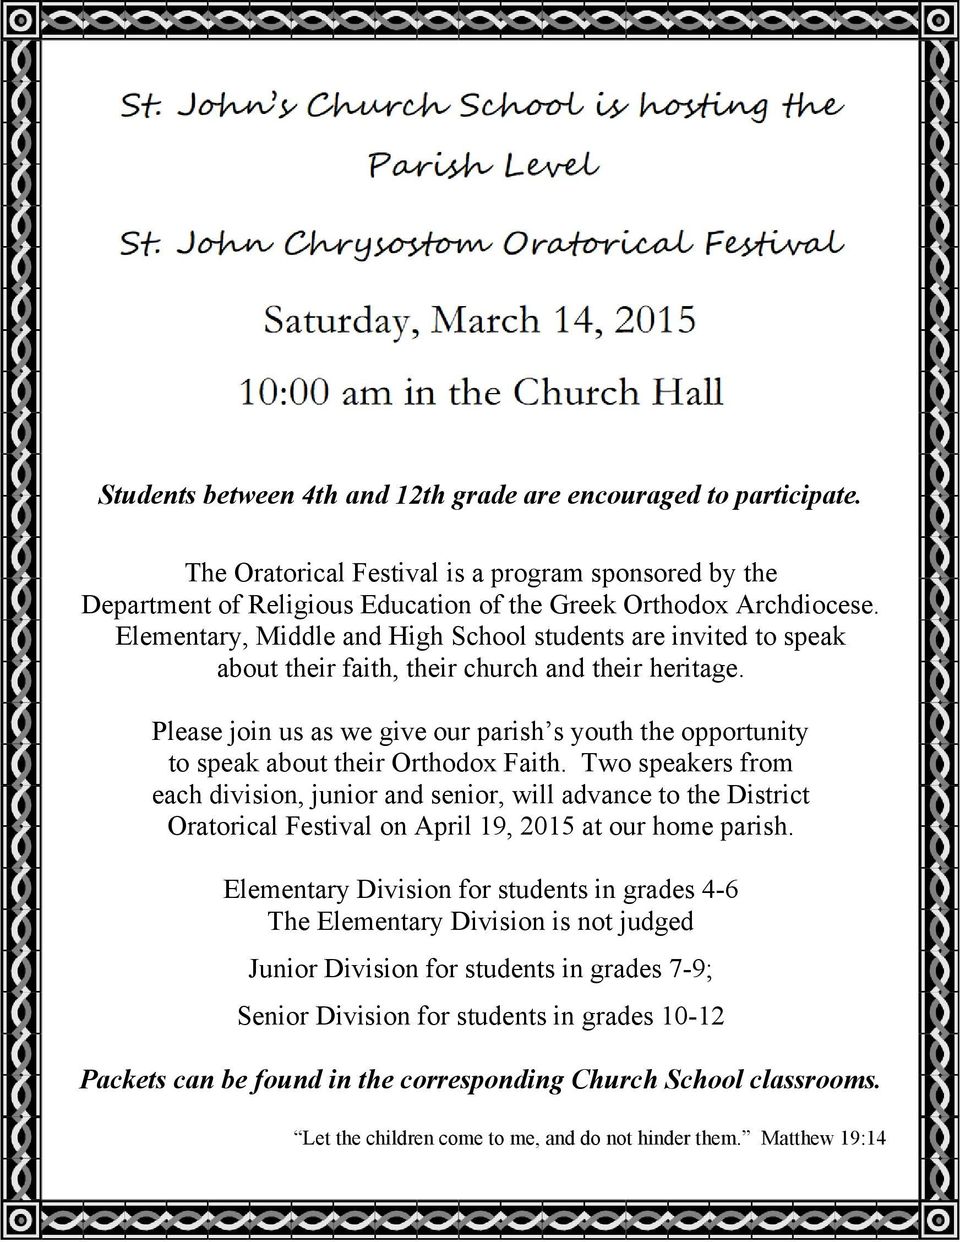 Please join us as we give our parish s youth the opportunity to speak about their Orthodox Faith.